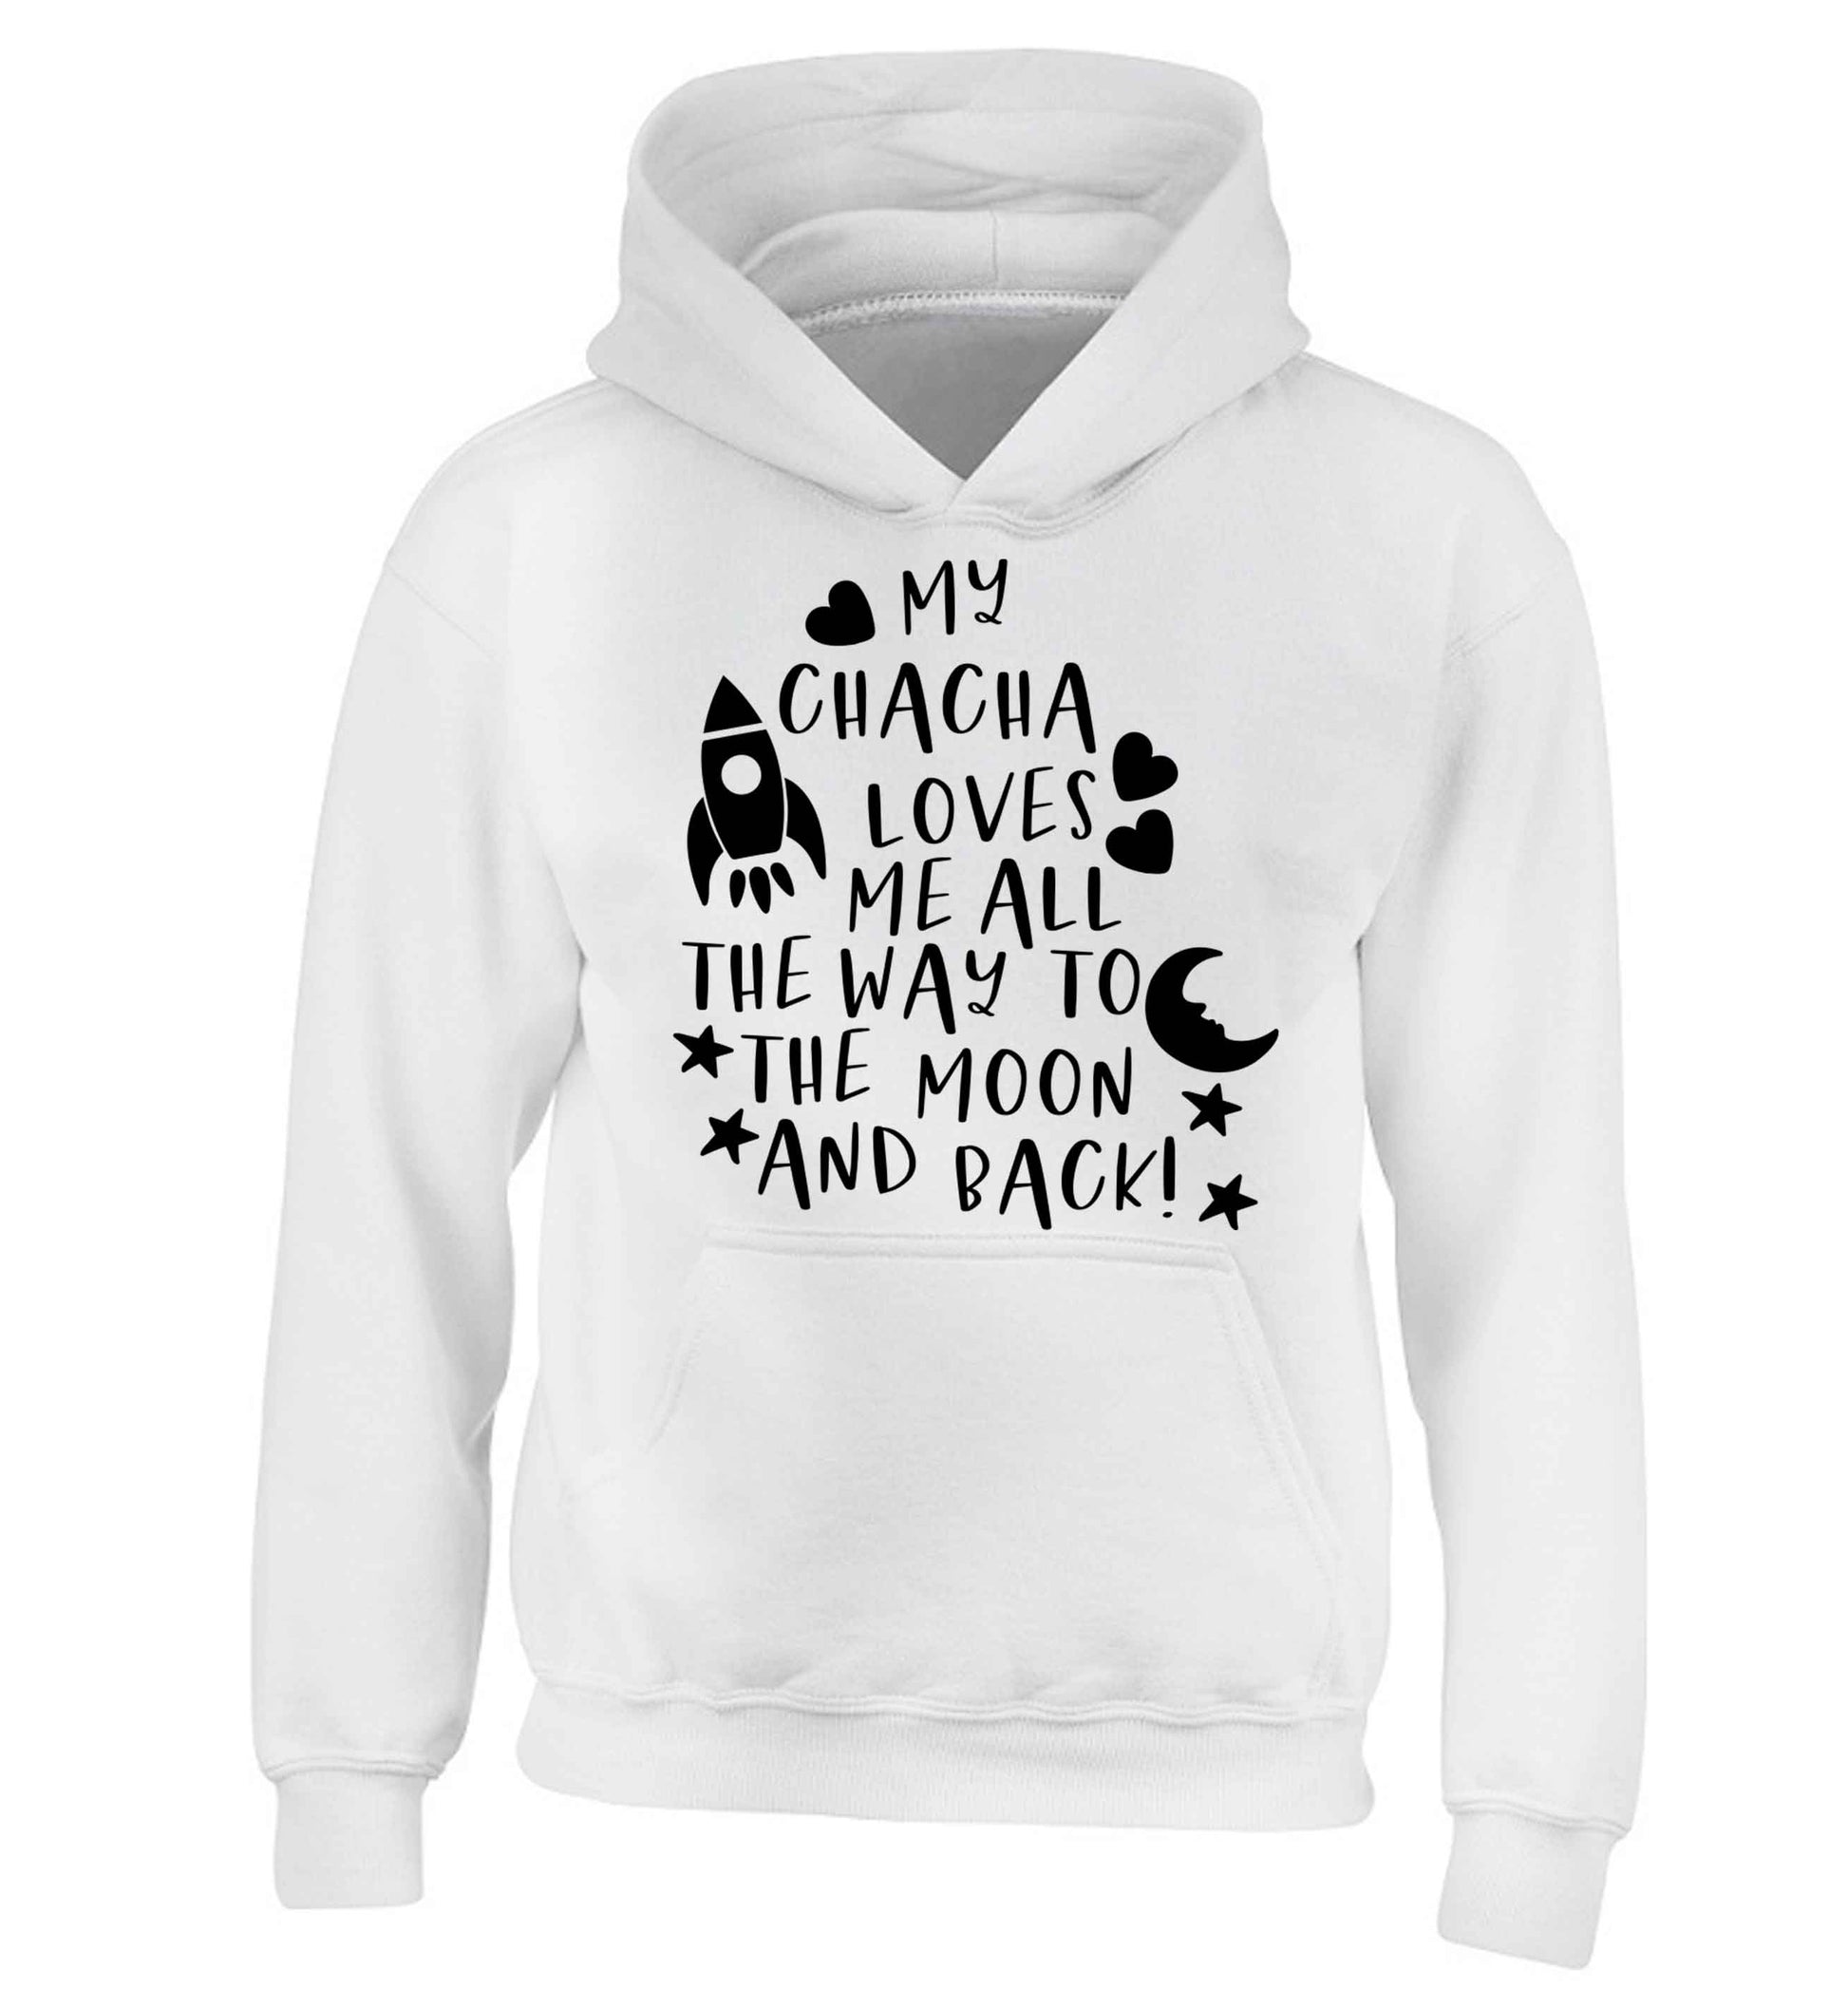 My chacha loves me all the way to the moon and back children's white hoodie 12-13 Years